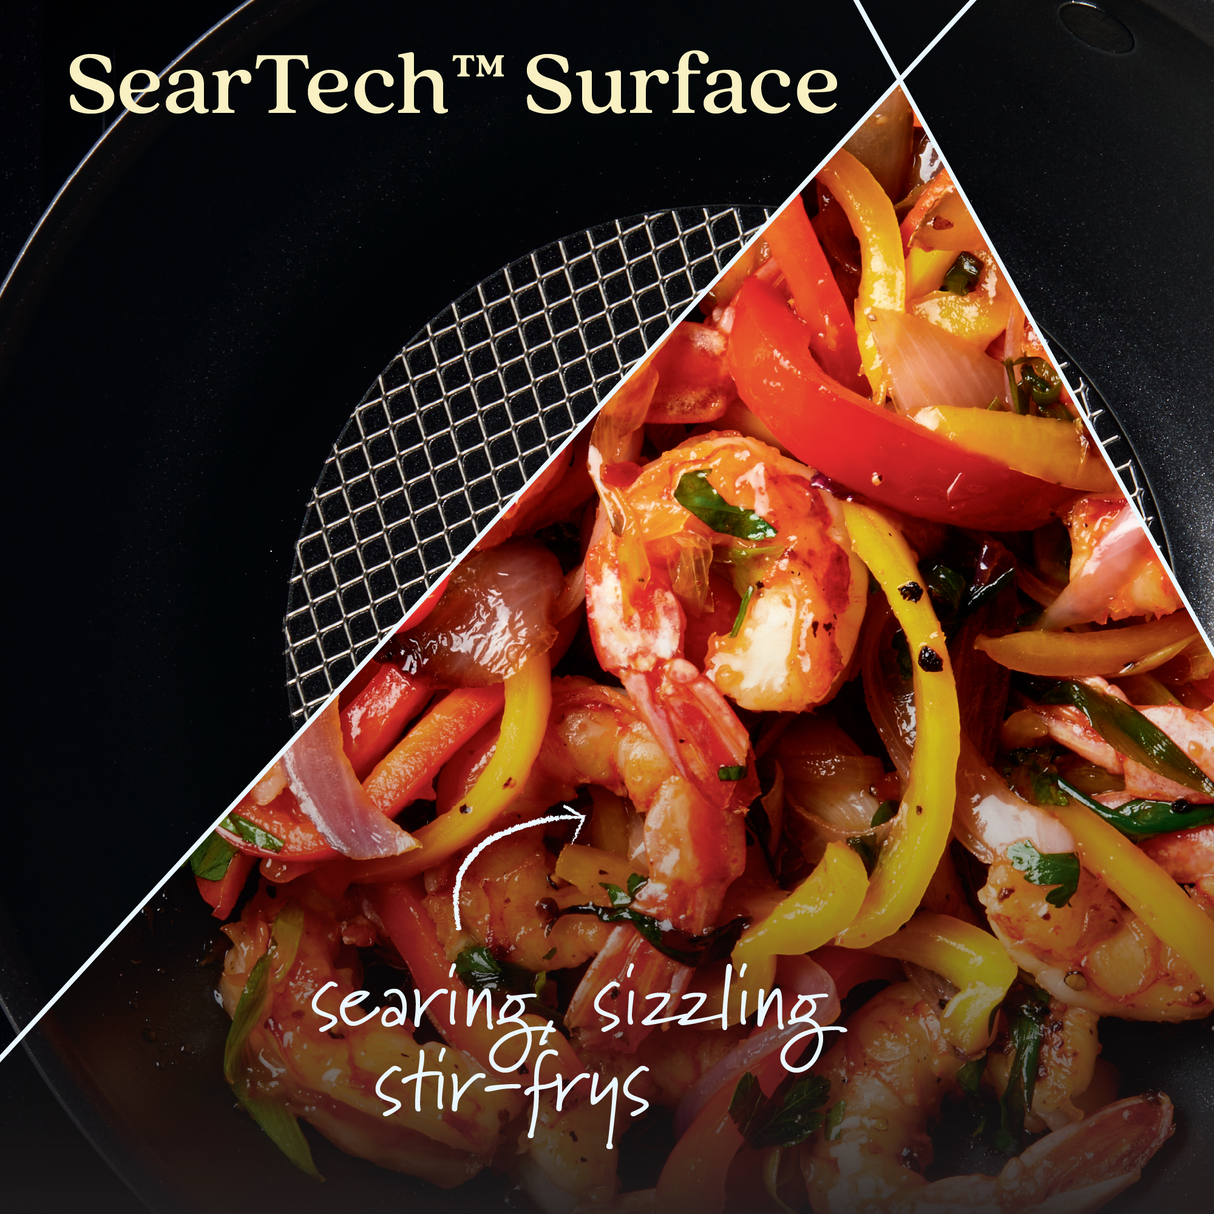 Seartech surface for searing, sizzling stir-frys.